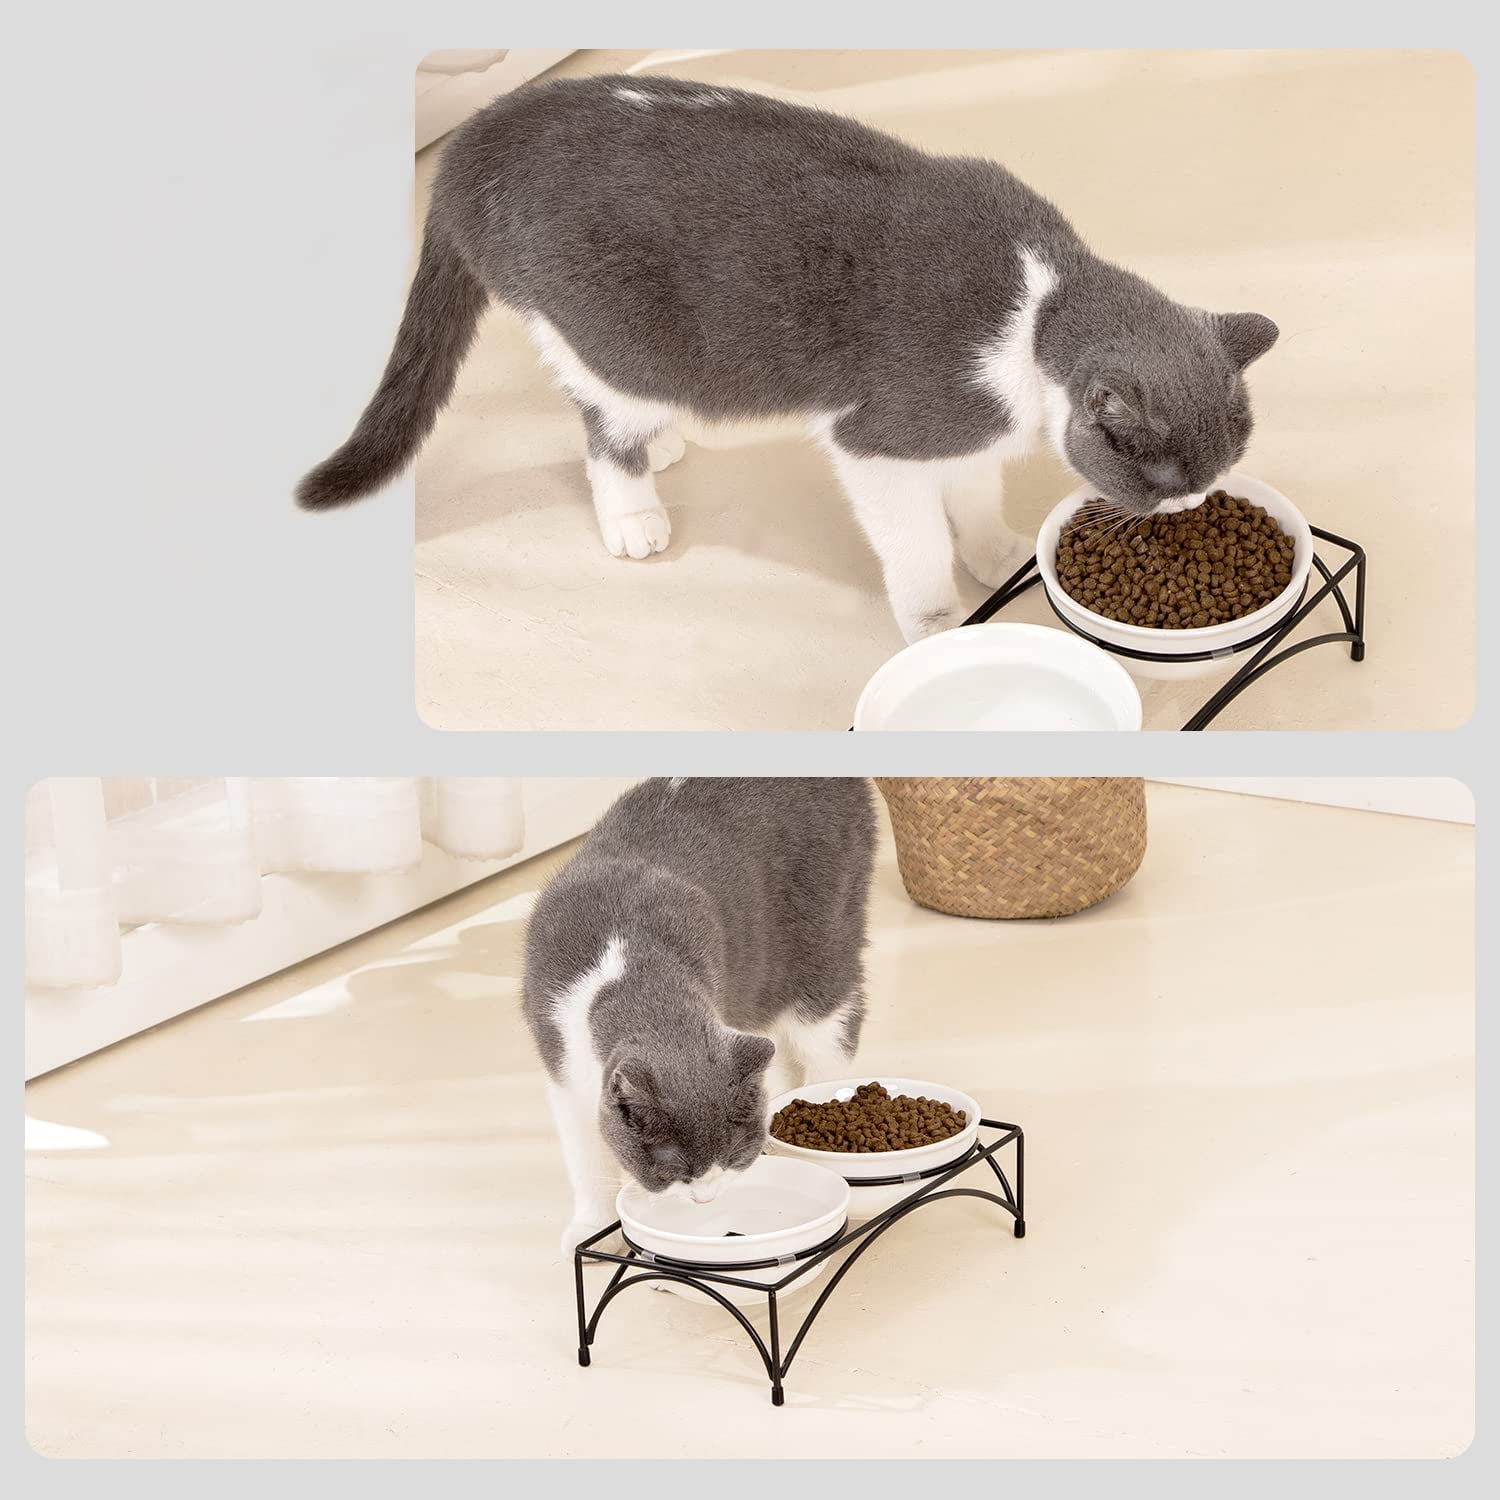 Elevated Cat Bowls by Pawfect Pets- 4” Raised Cat Bowl. Cat Feeder Comes  with Four Stainless Steel Cat Bowls. Cat Food Bowl - Yahoo Shopping